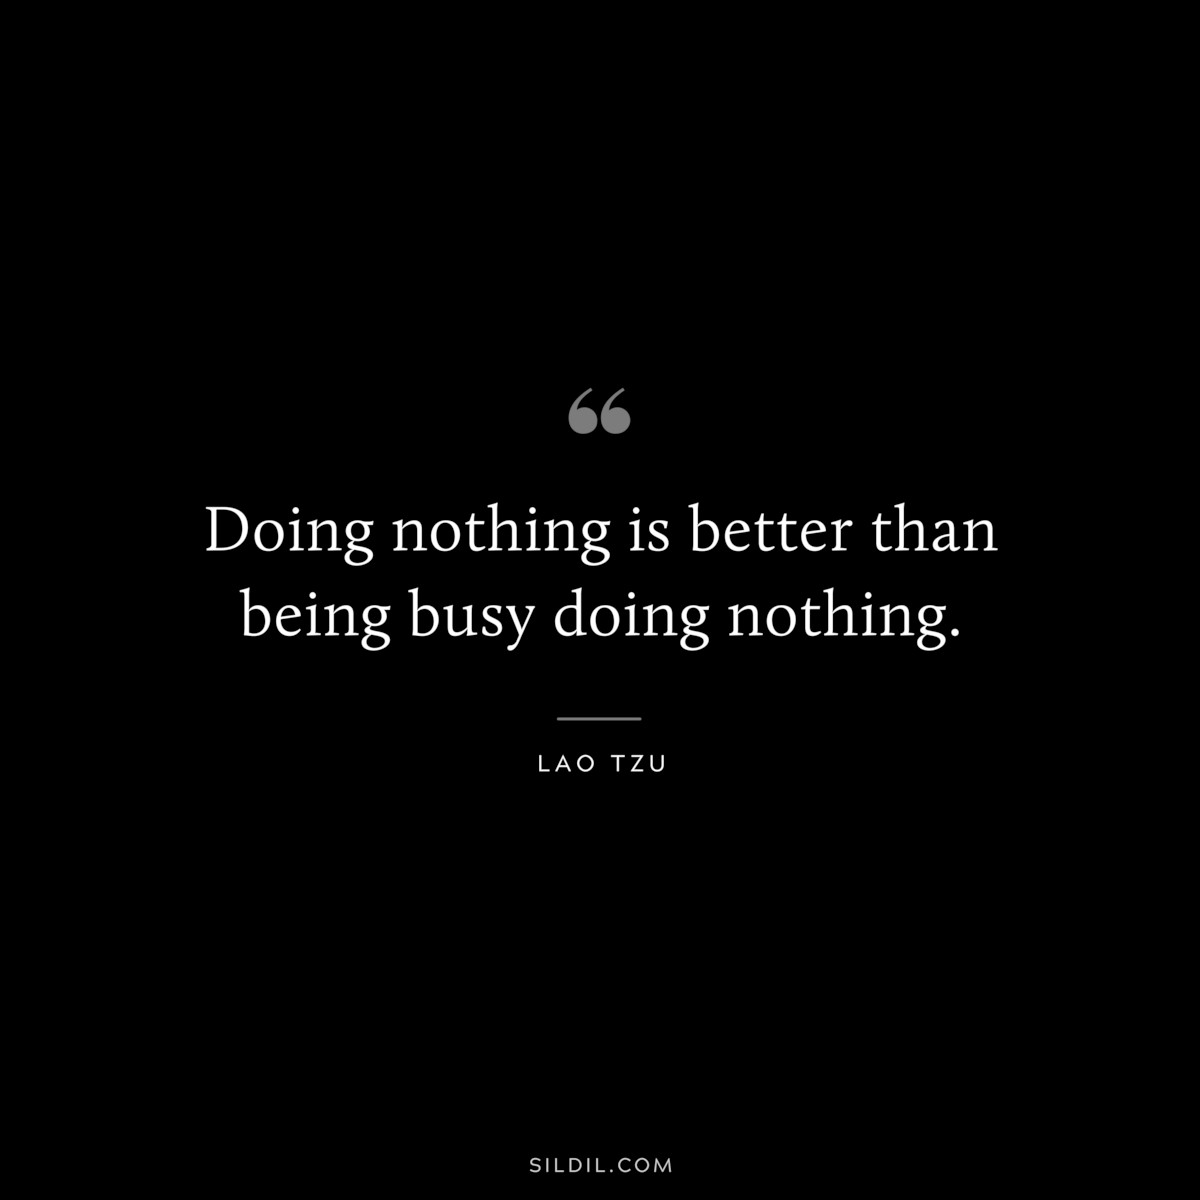 Doing nothing is better than being busy doing nothing. ― Lao Tzu